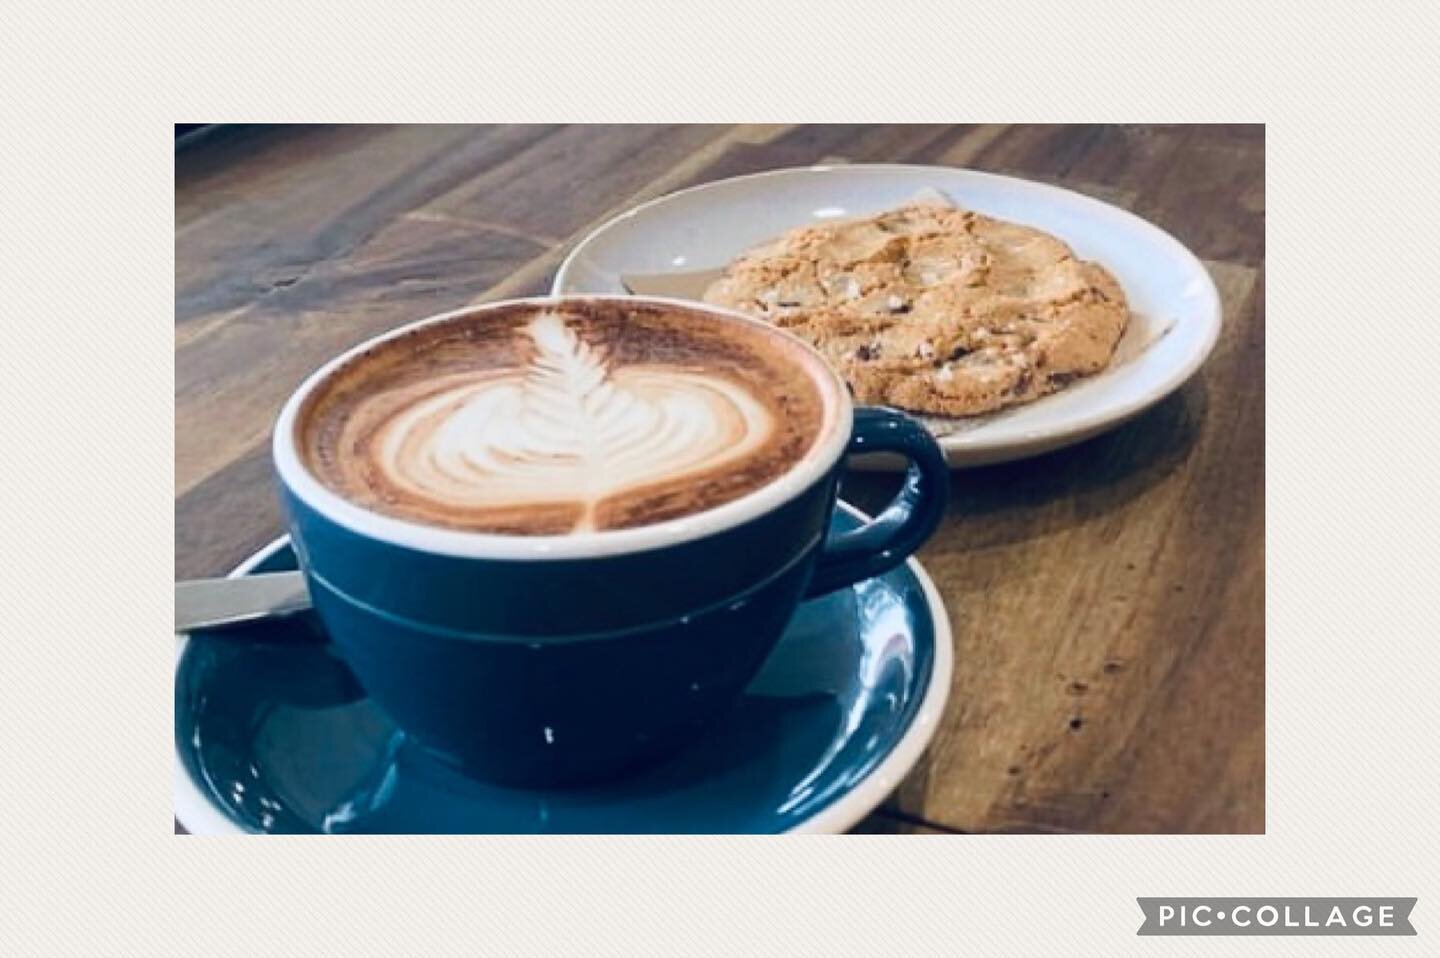 Celebrating International Happiness Day the best way possible with a hot coffee and a salt chocolate cookie 😋

#internationalhappinessday #coffee #gymea #sutherlandshire #commongroundsgymea